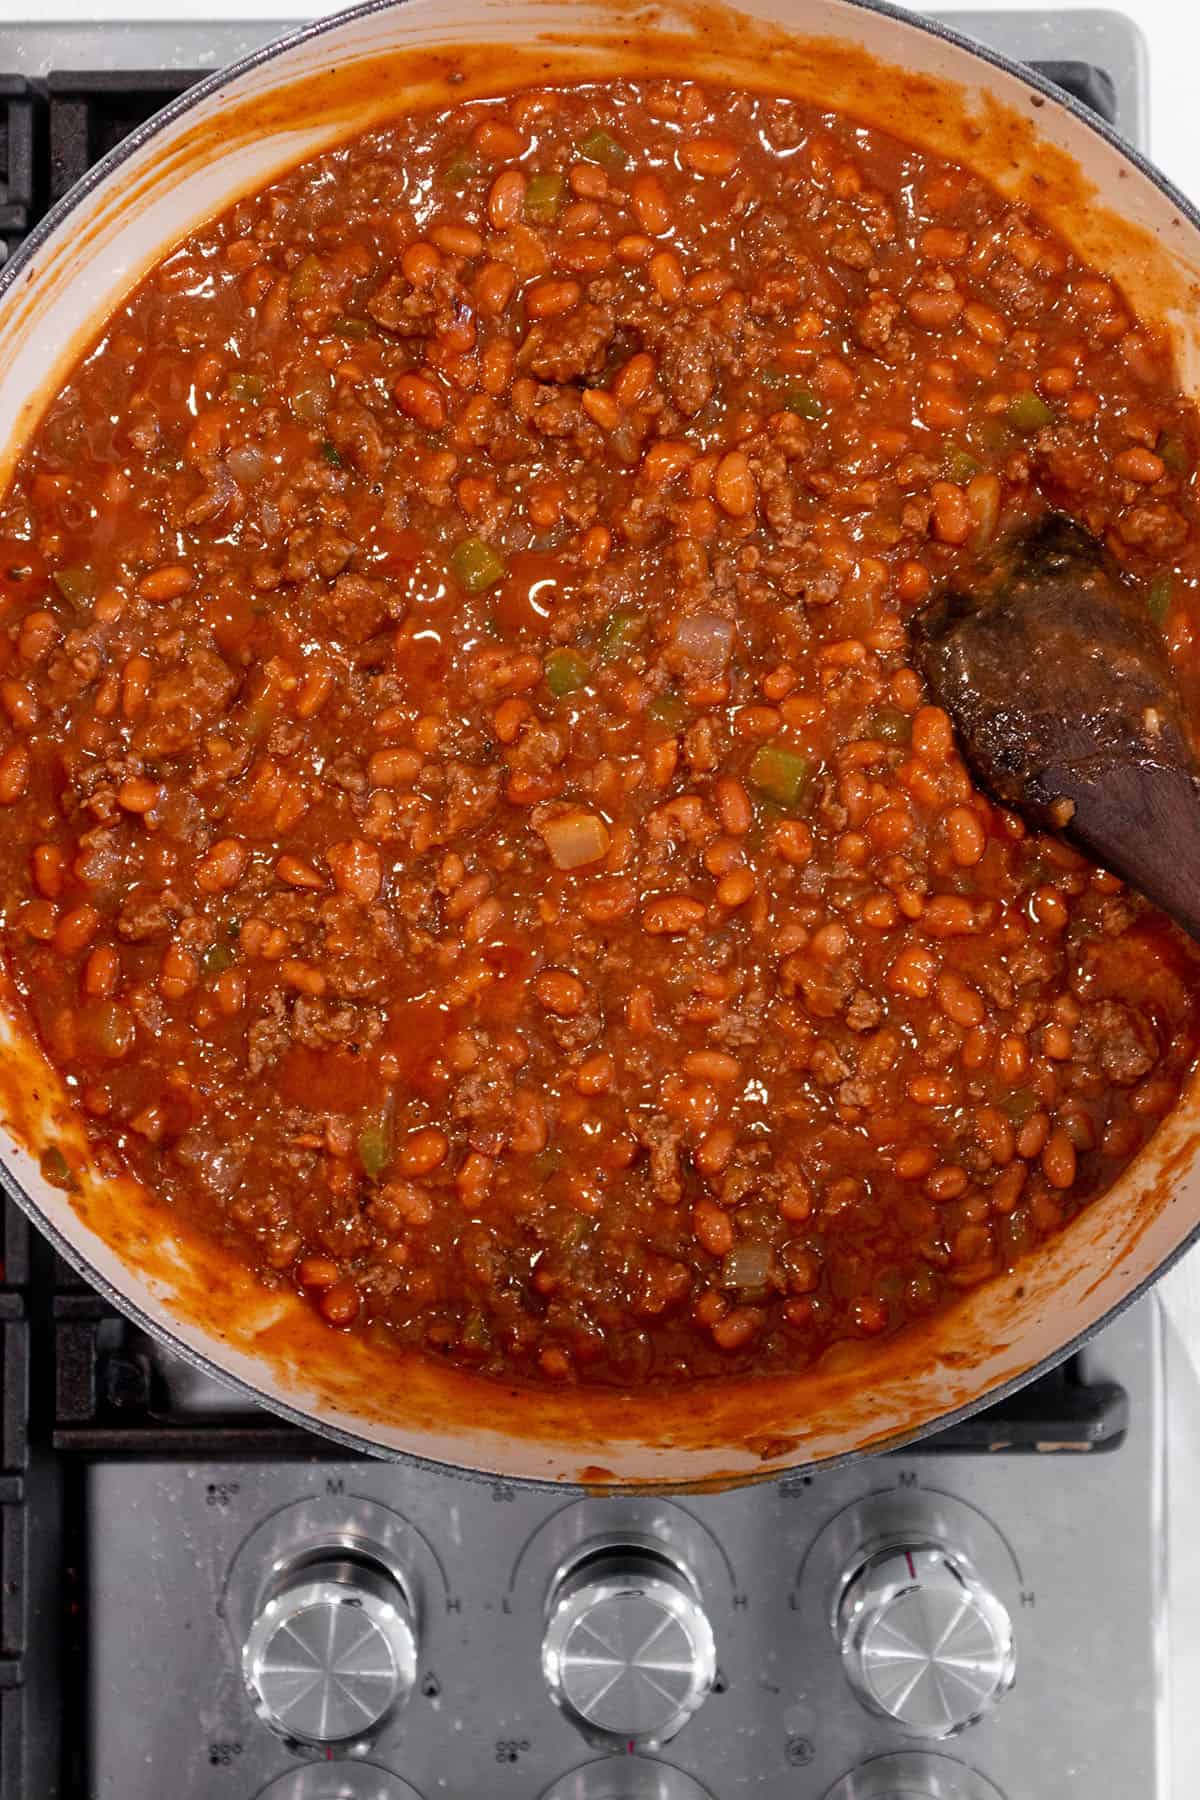 A large skillet on the stove with baked beans simmering.